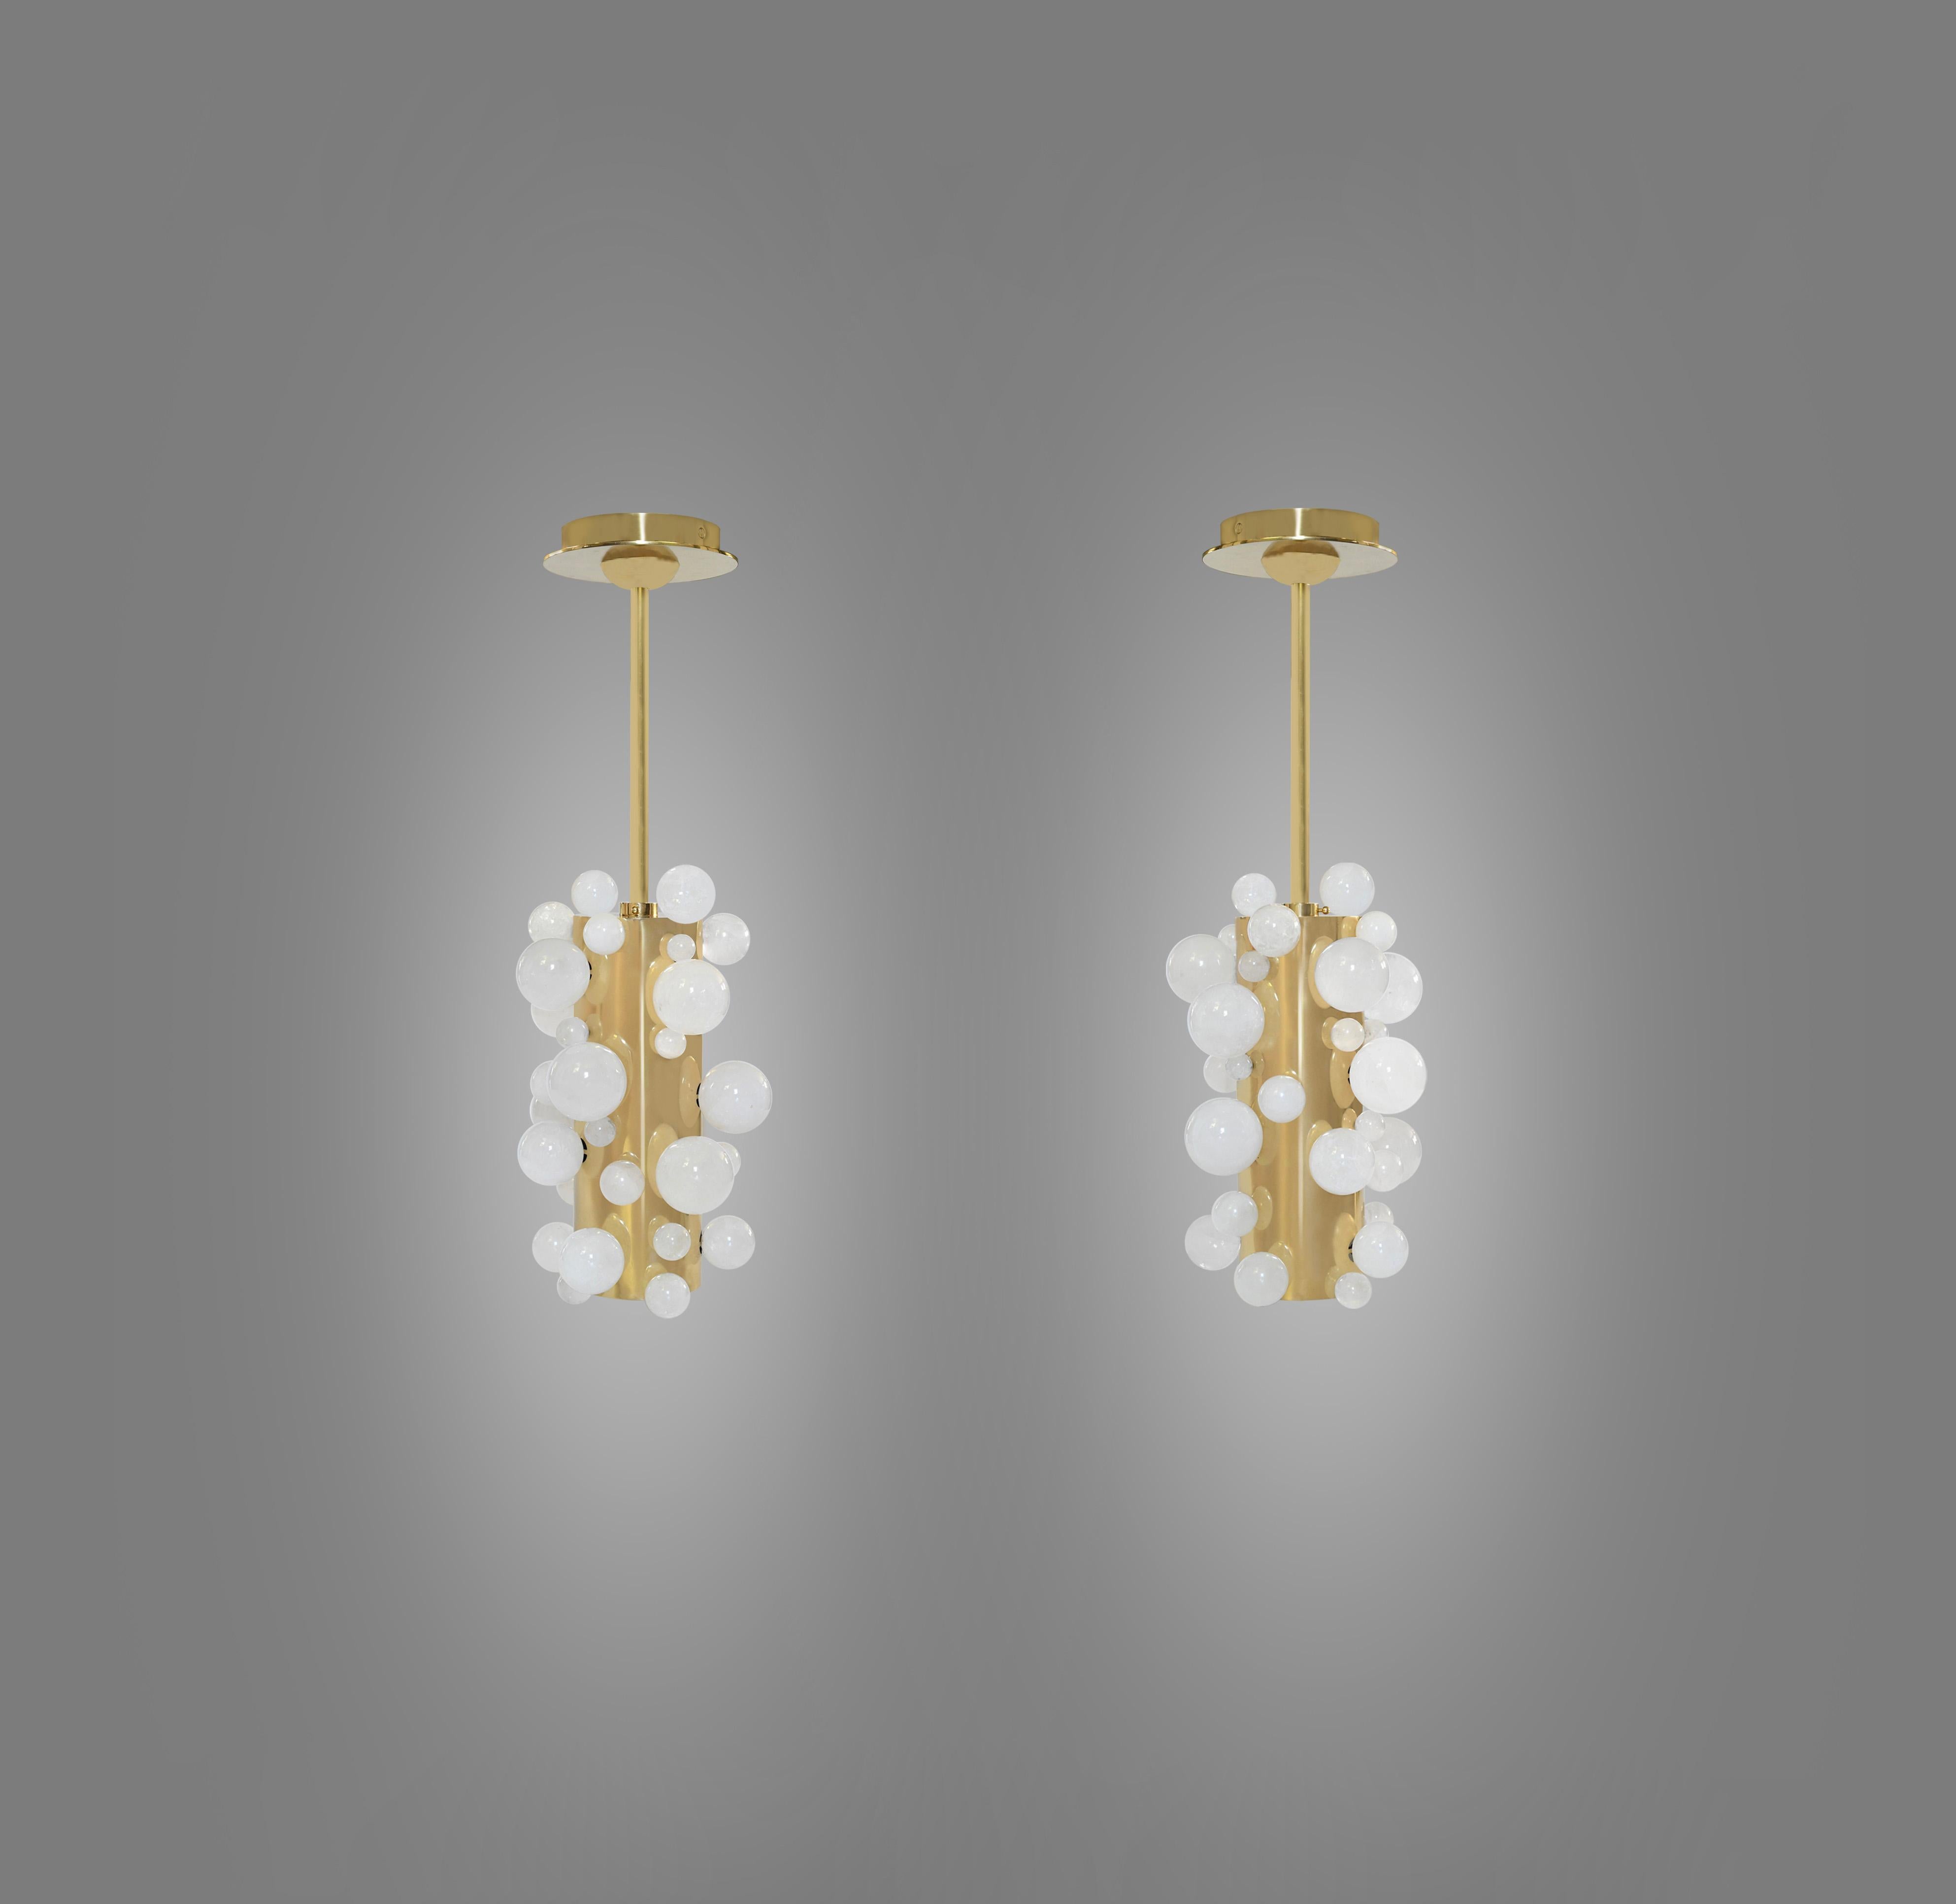 Pair of rock crystal bubble pendant lights with polished brass finishes. Created by Phoenix Gallery, NYC.
Two sockets installed. Use LED warm light bulbs. 50w each. 100 w total.
Dimension of the pendant: 8